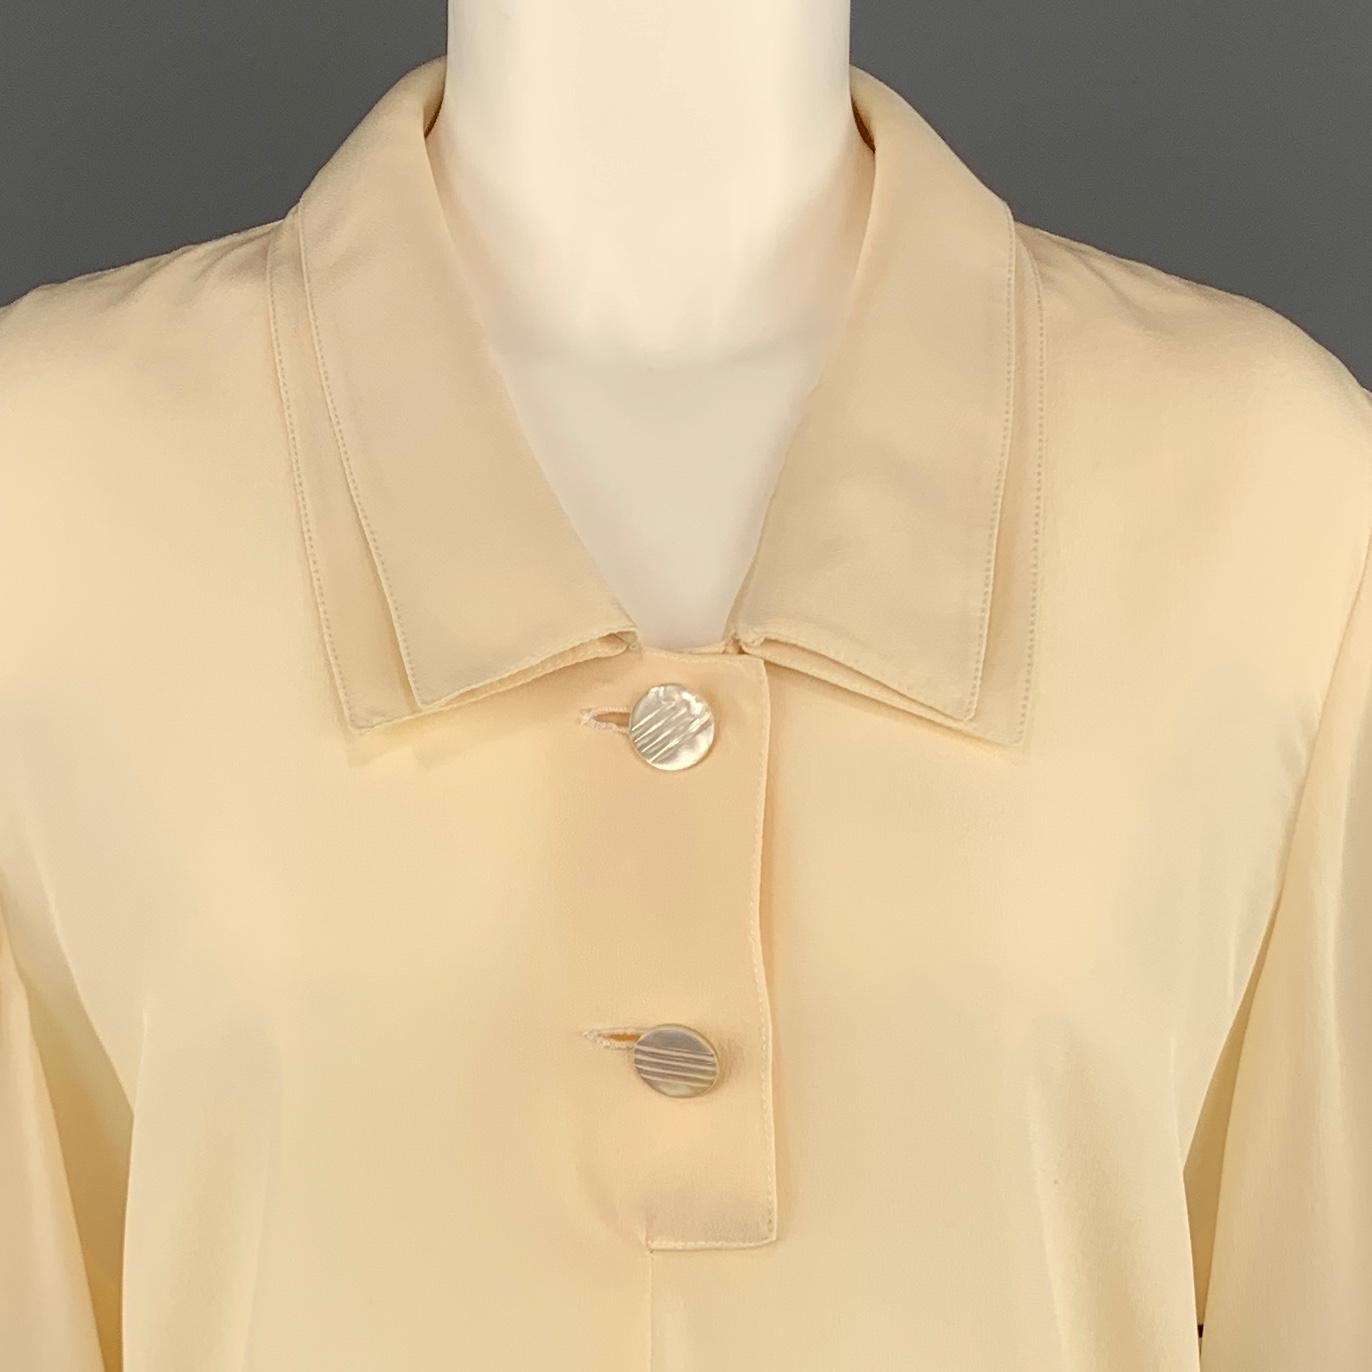 Vintage VALENTINO blouse comes in cream beige silk with a double pointed collar, two button half closure, and short sleeves. Spot. As-is. Made in Italy.
 
Good Pre-Owned Condition.
Marked: (no size)
 
Measurements:
 
Shoulder: 18 in.
Bust: 42